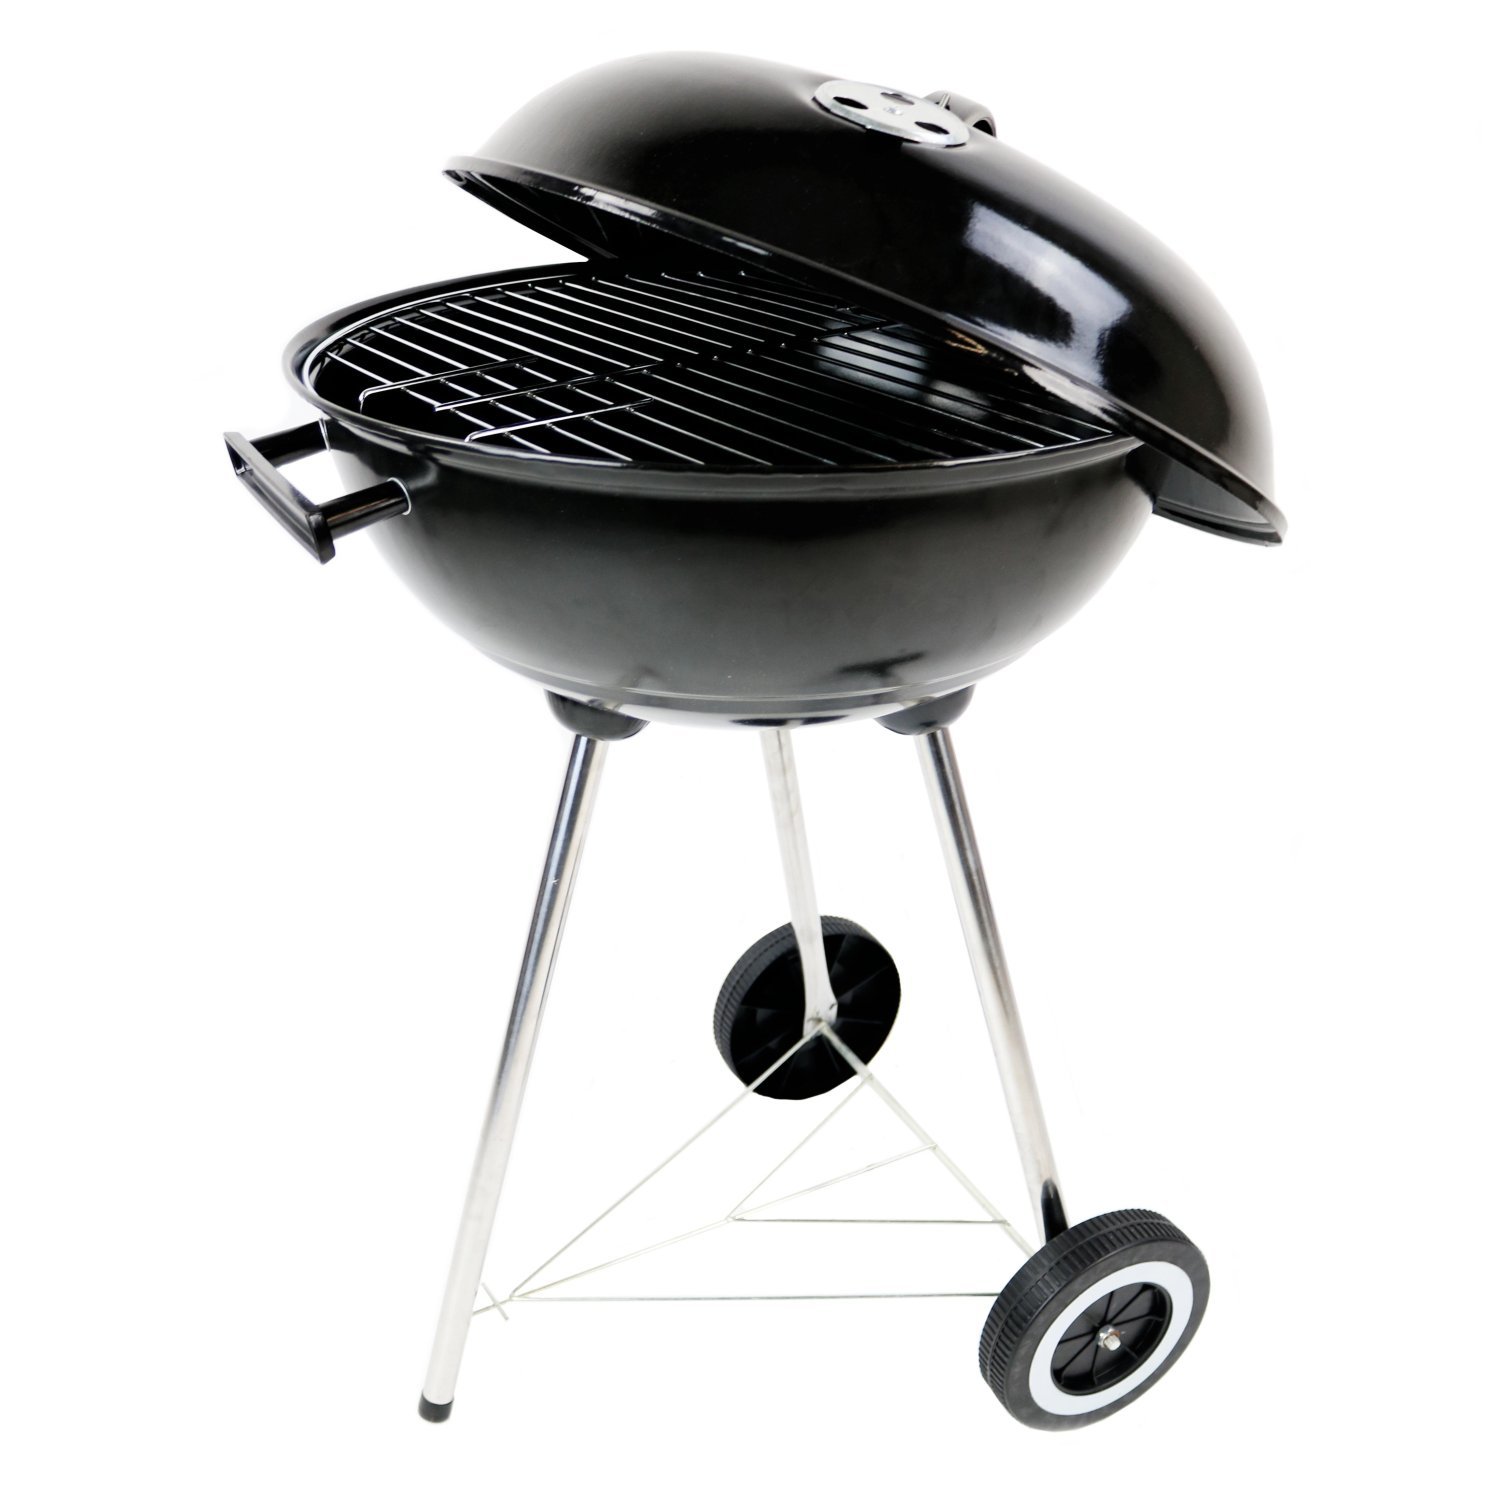 43cm Kettle Charcoal Barbecue BBQ Grill - £29.99 : Oypla ...